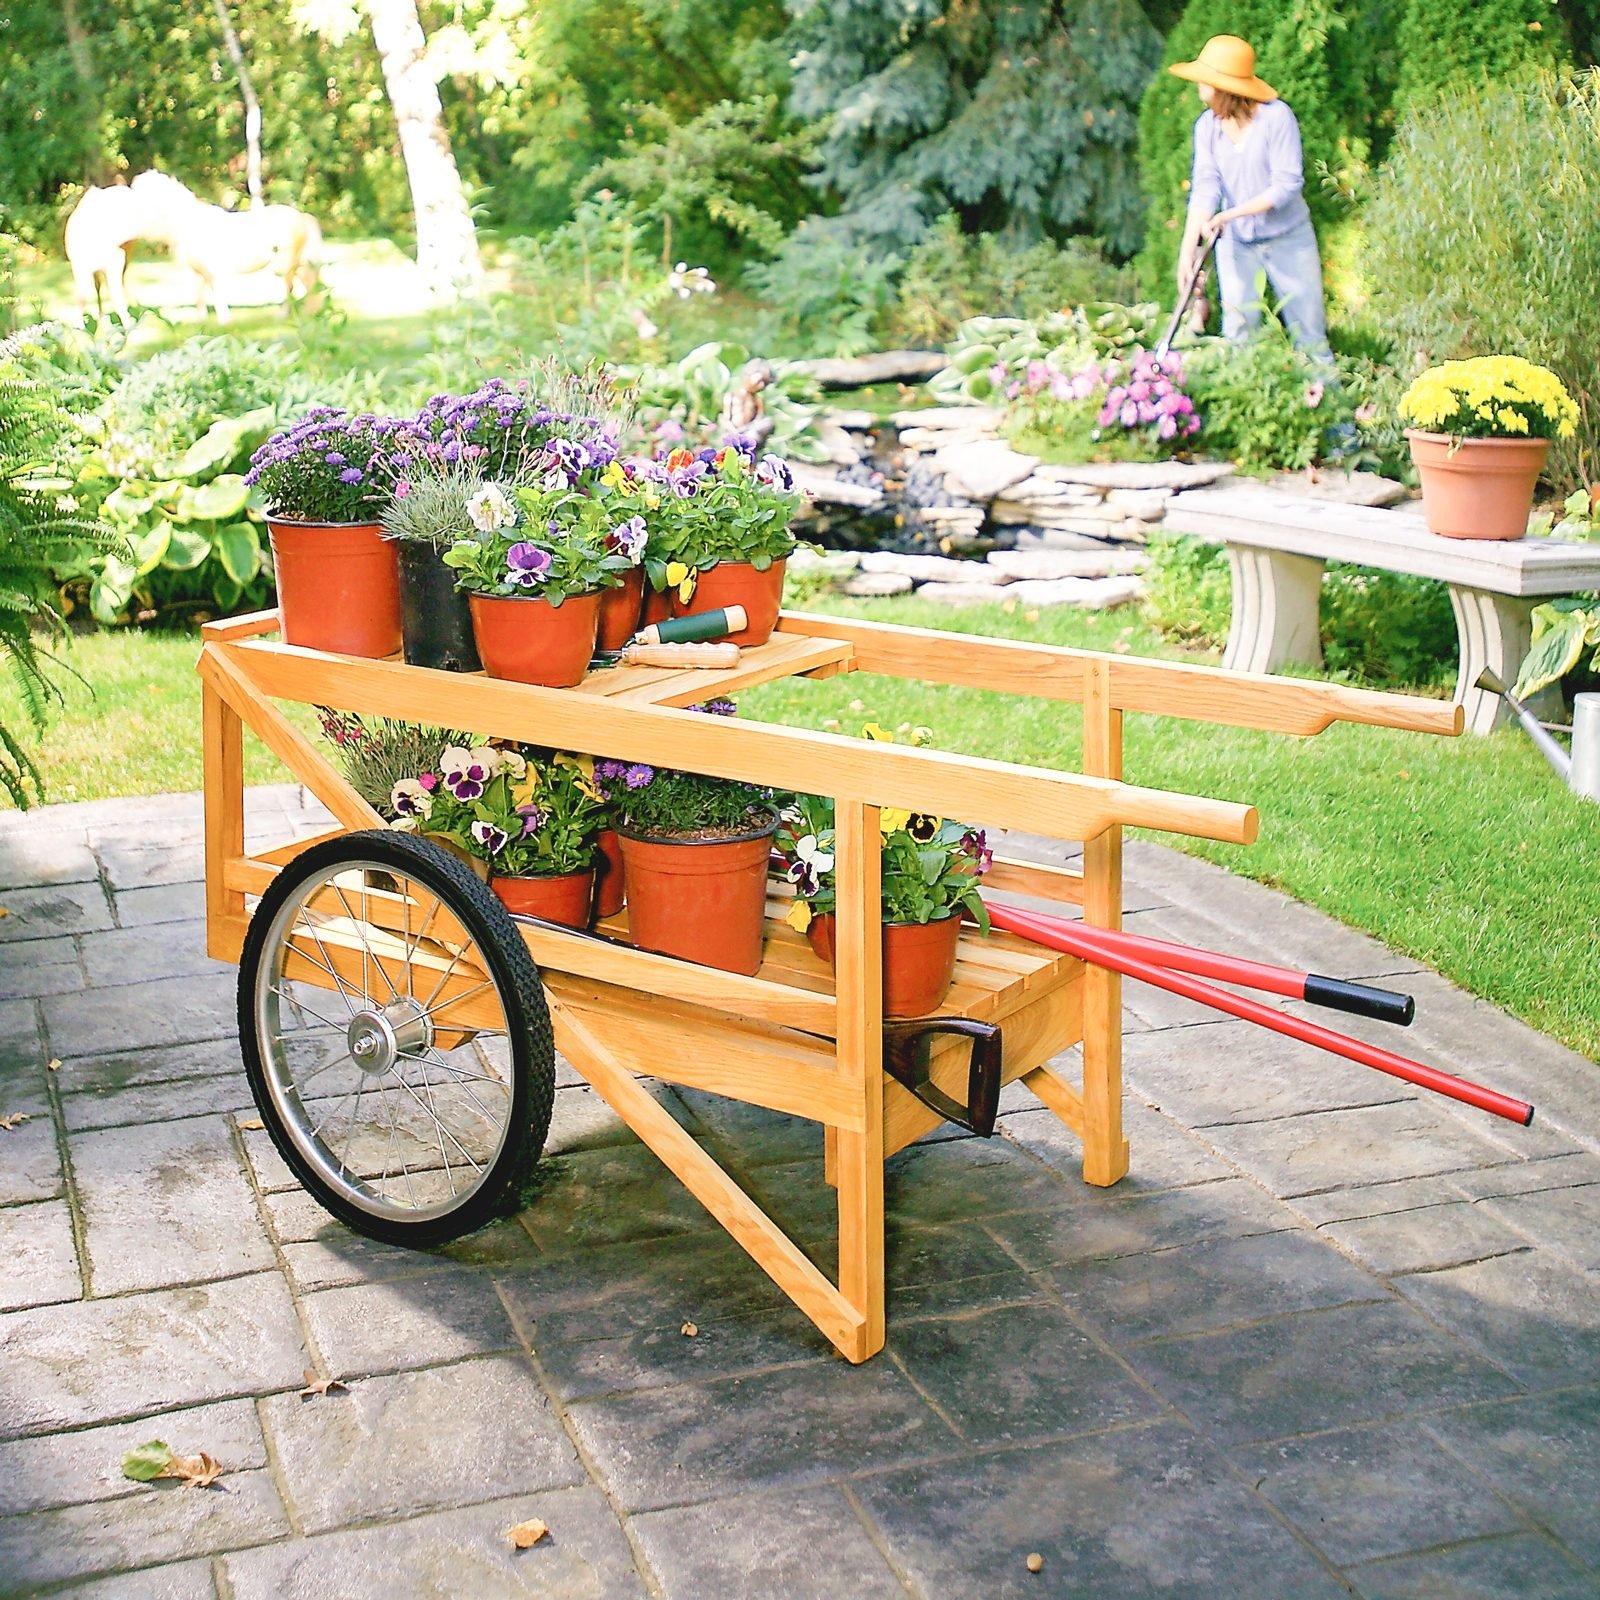 How to Construct a DIY Wooden Cart With Wheels